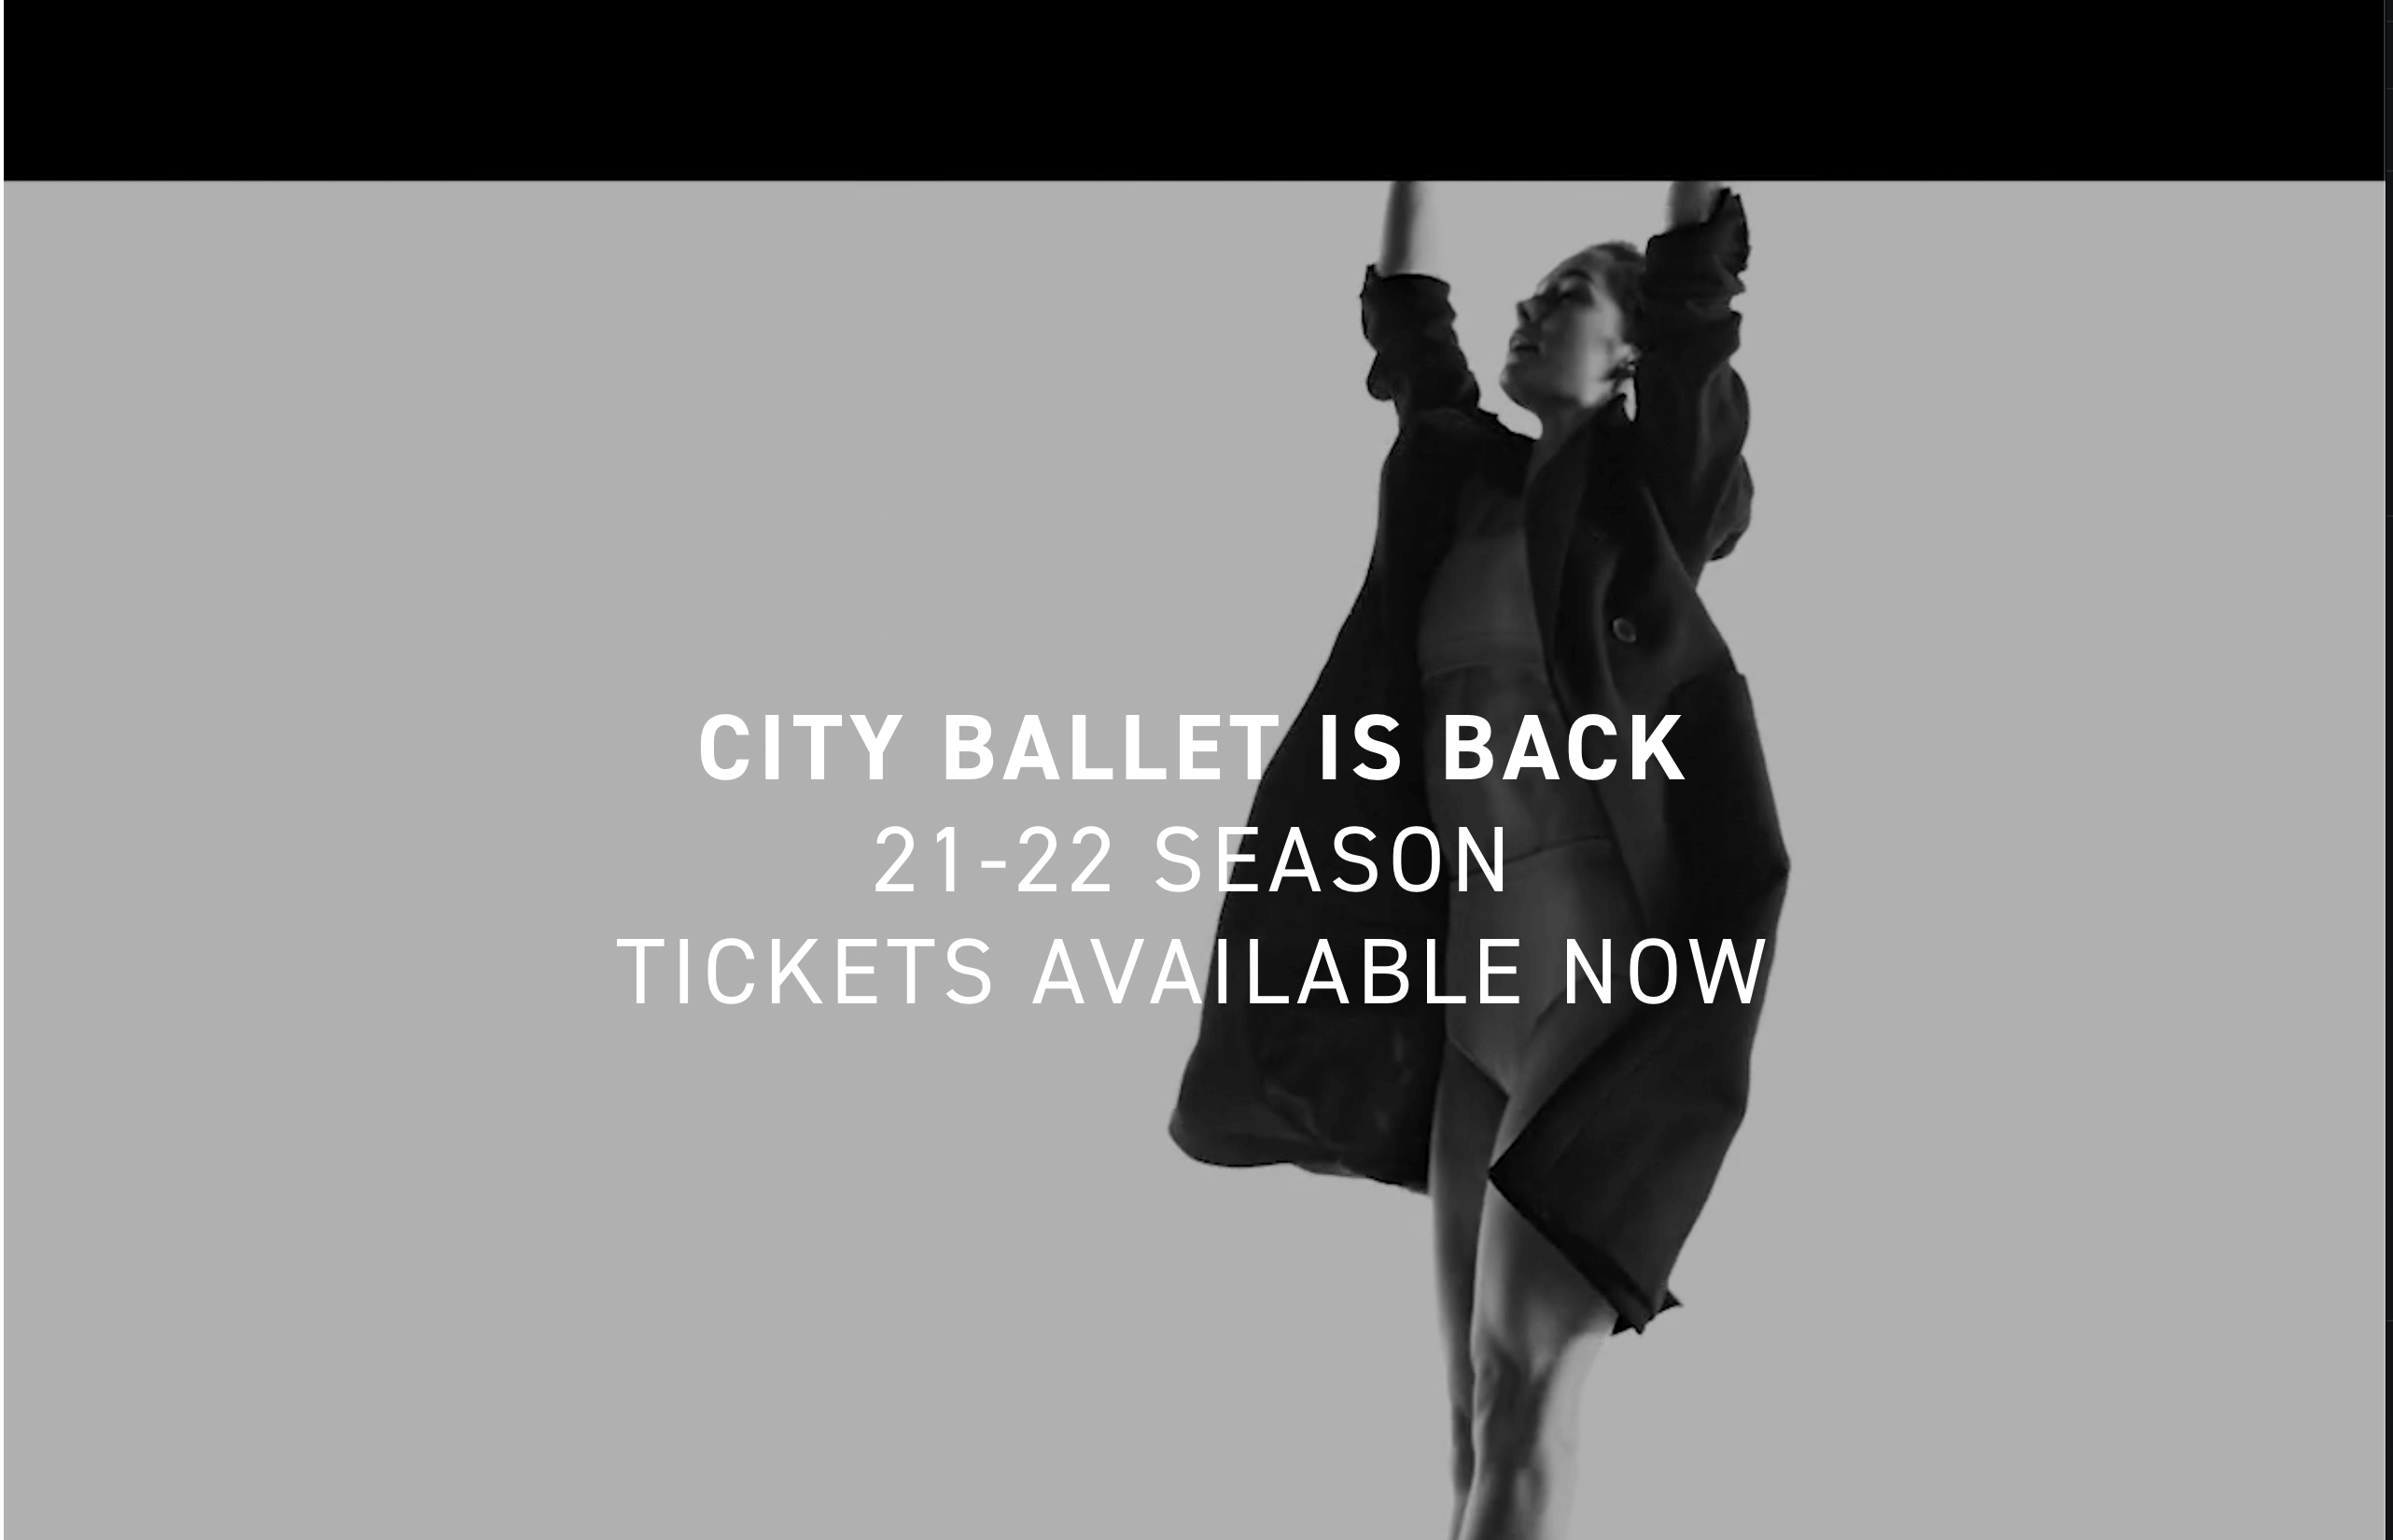 New York City Ballet's home page